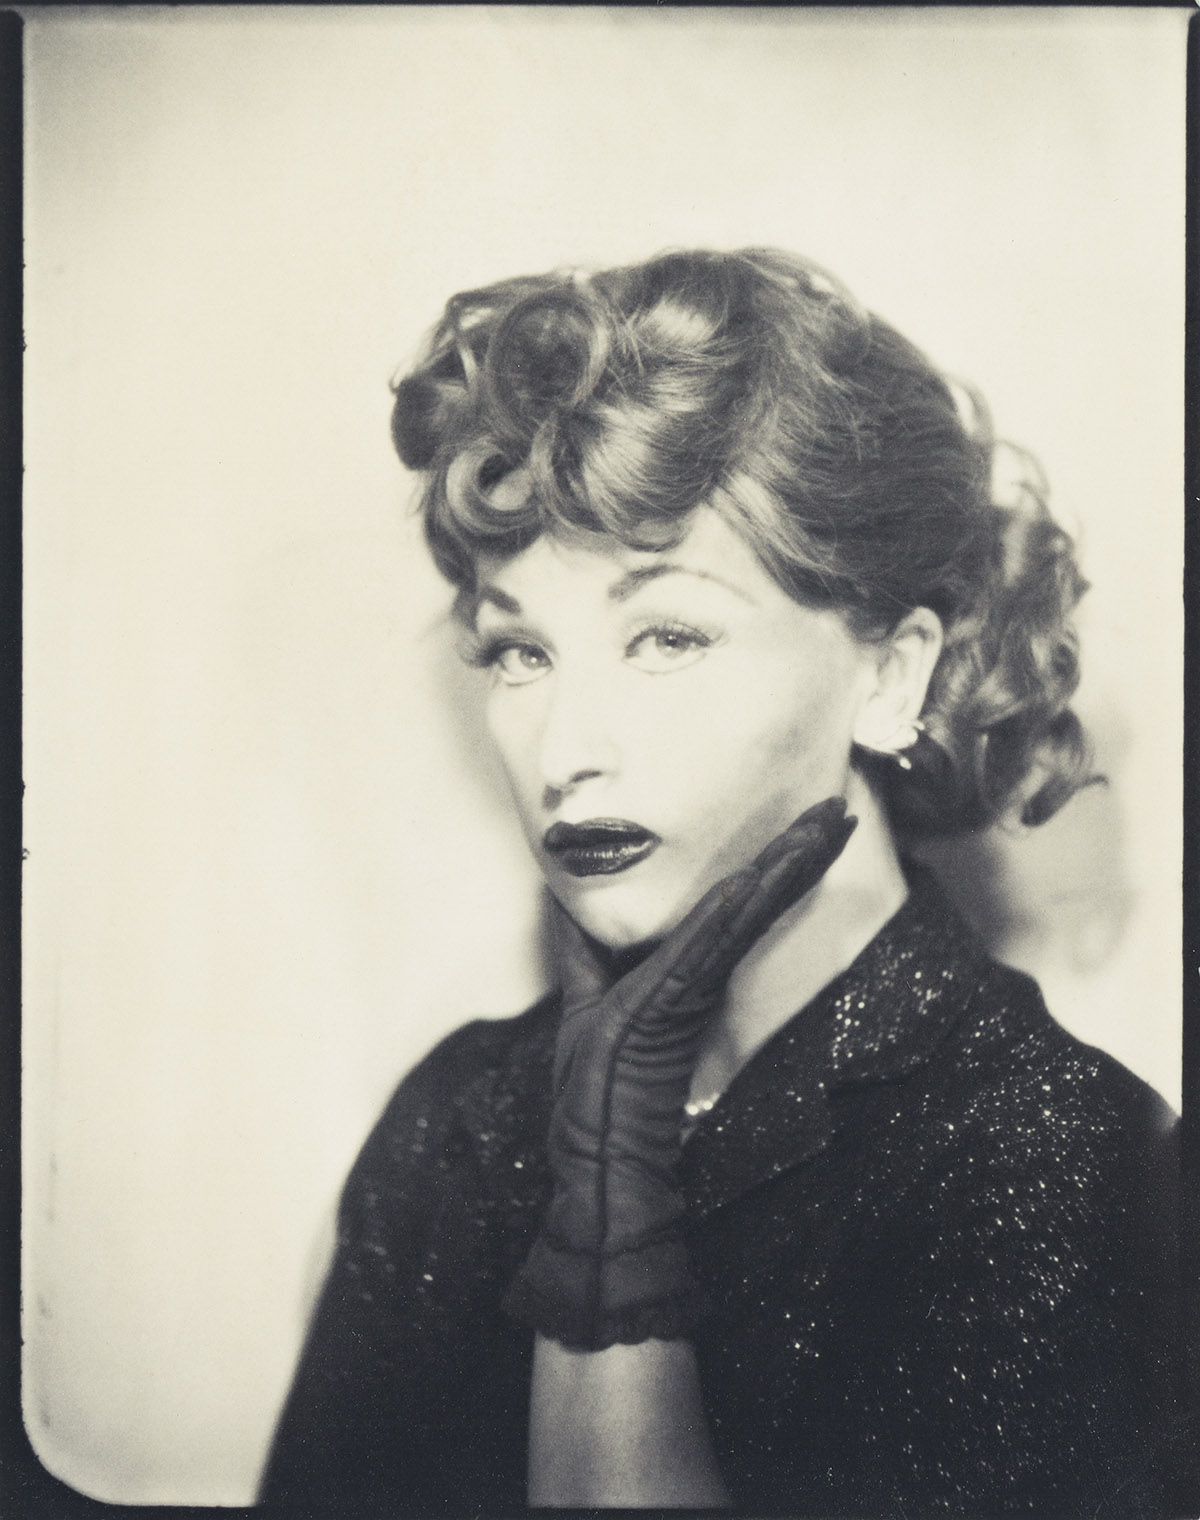 CINDY SHERMAN (1954- ) Untitled (Lucille Ball).